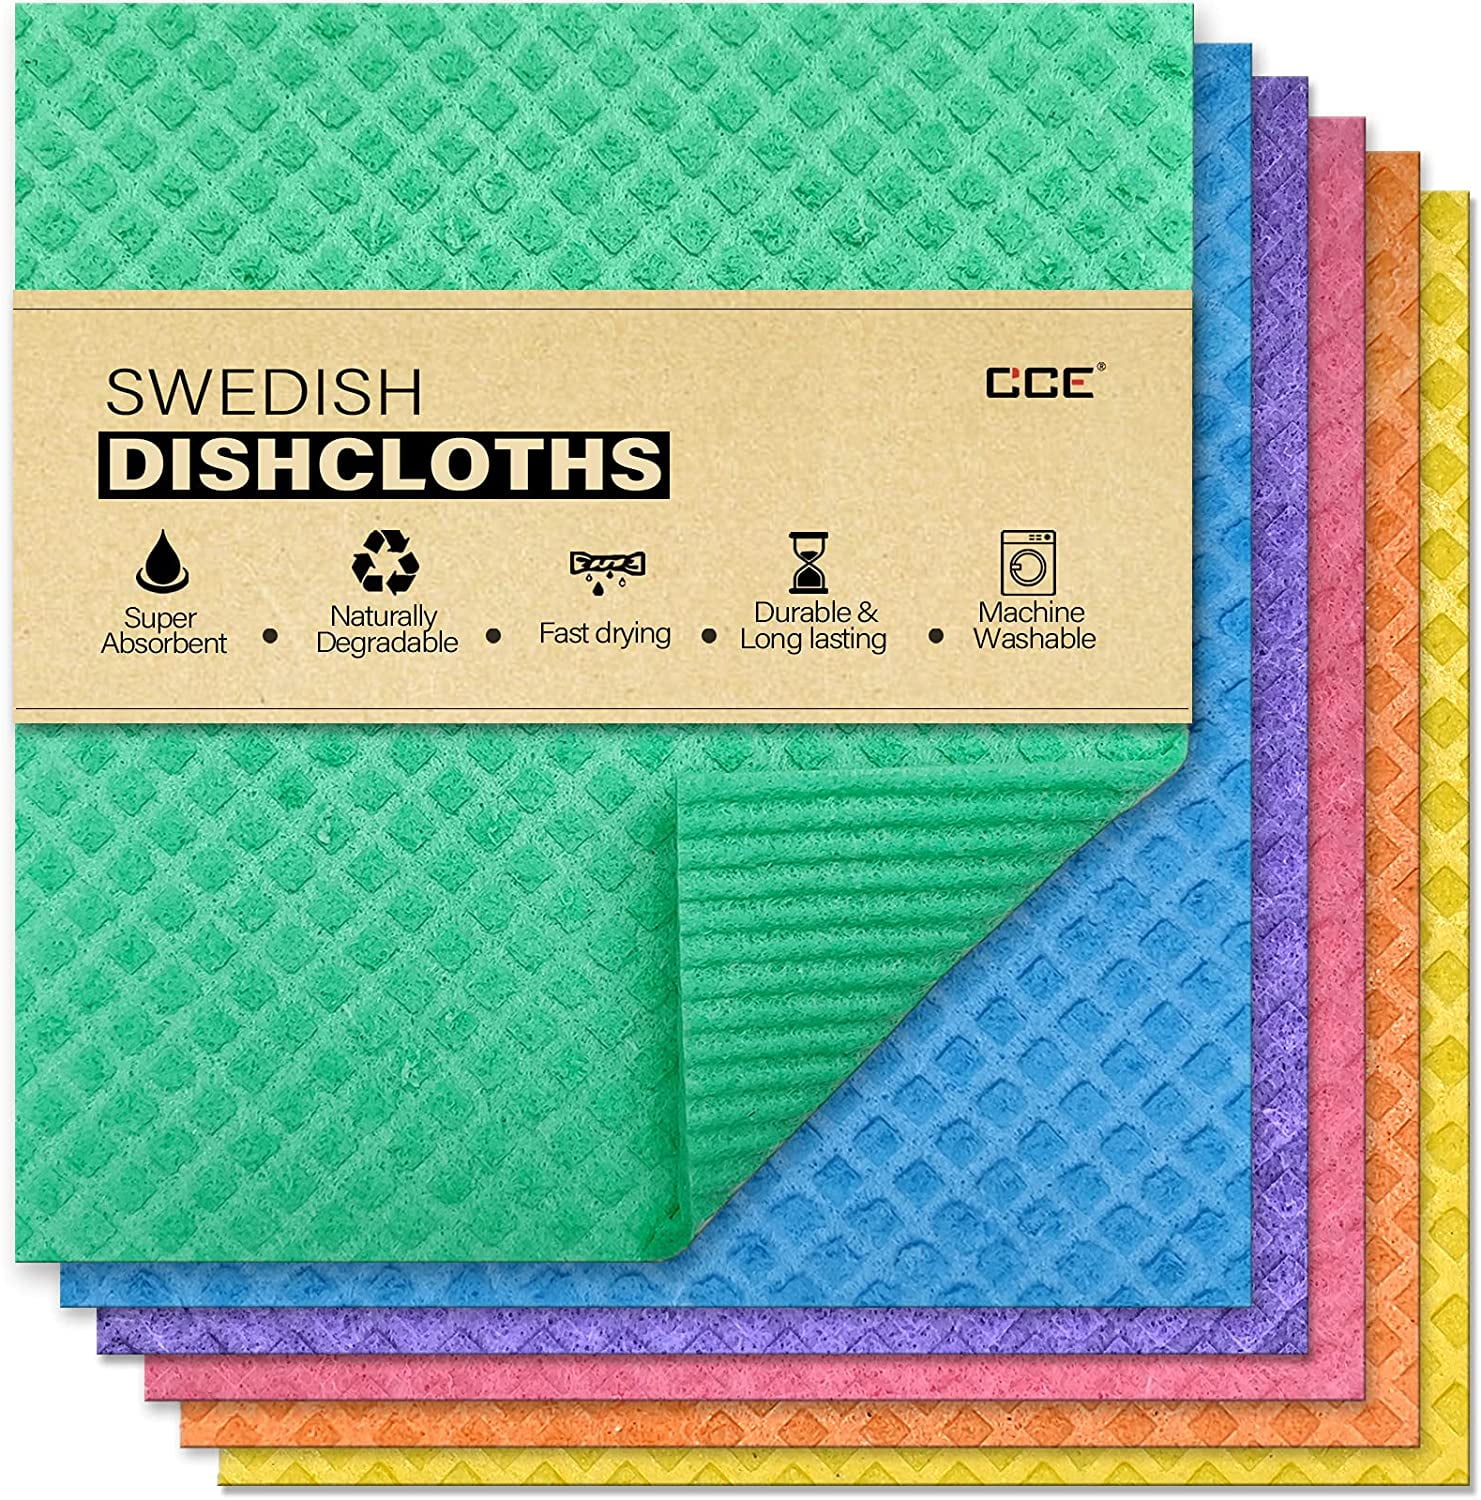 6 Pieces Swedish Kitchen Dishcloths Mixed Trees Kitchen Cleaning Cloths Absorbent Cleaning Cloth Set Swedish Kitchen Dishcloths Quick Drying Reusable Cloths for Kitchen Counter Wipes Hand 